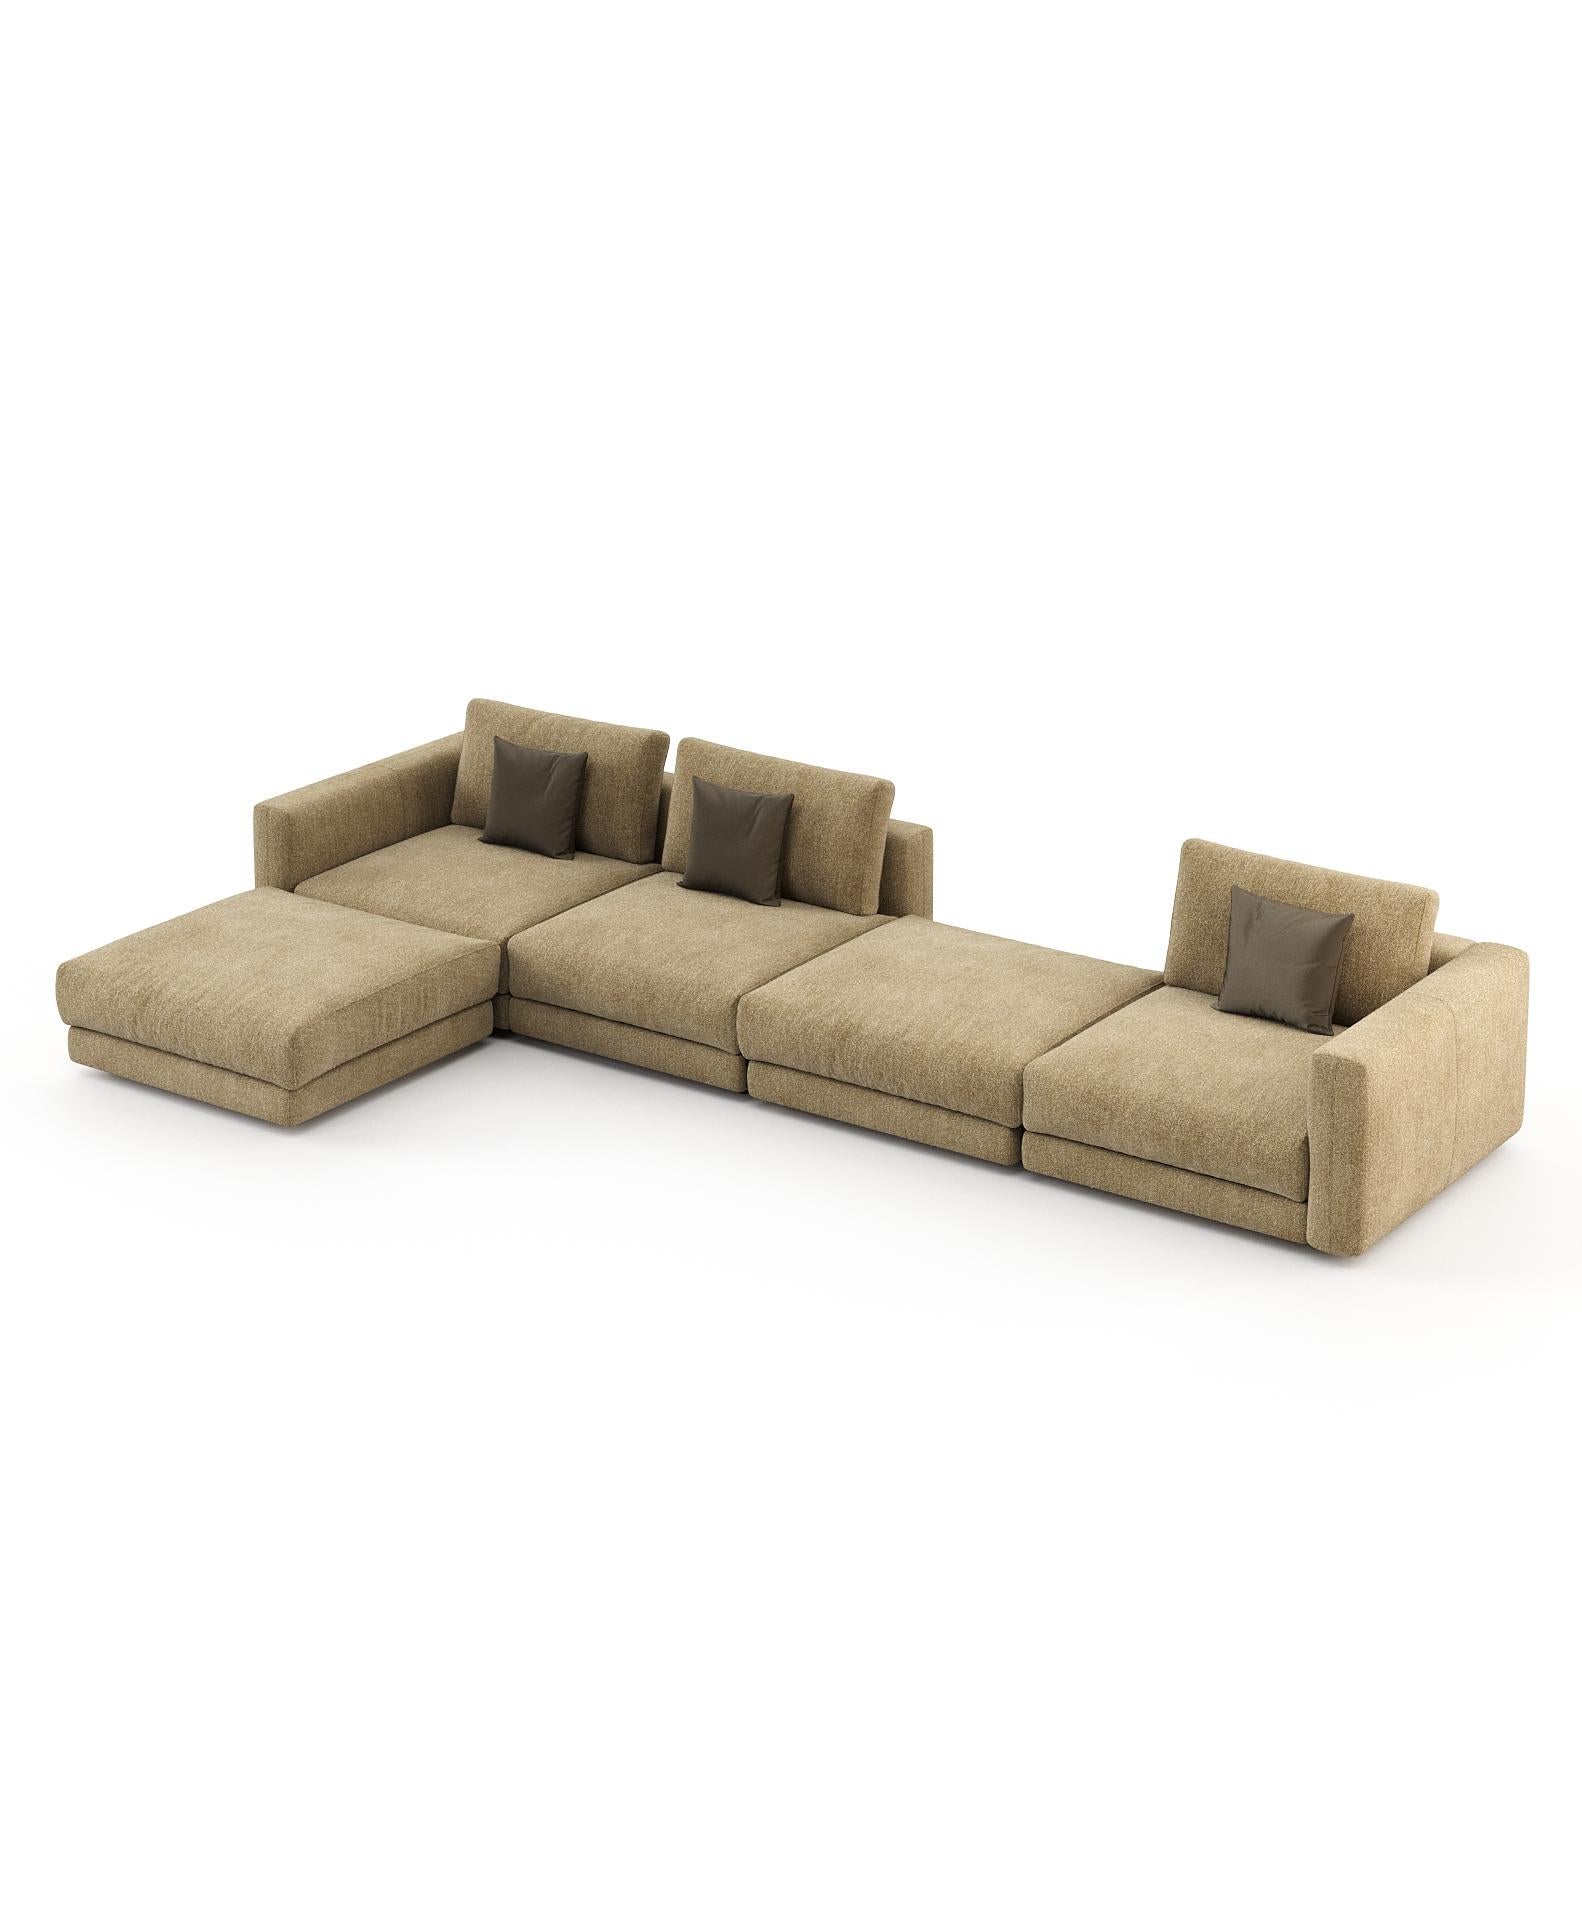 Montreal modular sofa is sharp lines and sweeping curves. Comfort and luxury imbue every detail to make Montreal the perfect sofa for a soft and inviting statement in any living room.

* Available in different finishes.
** Other custom sizes upon